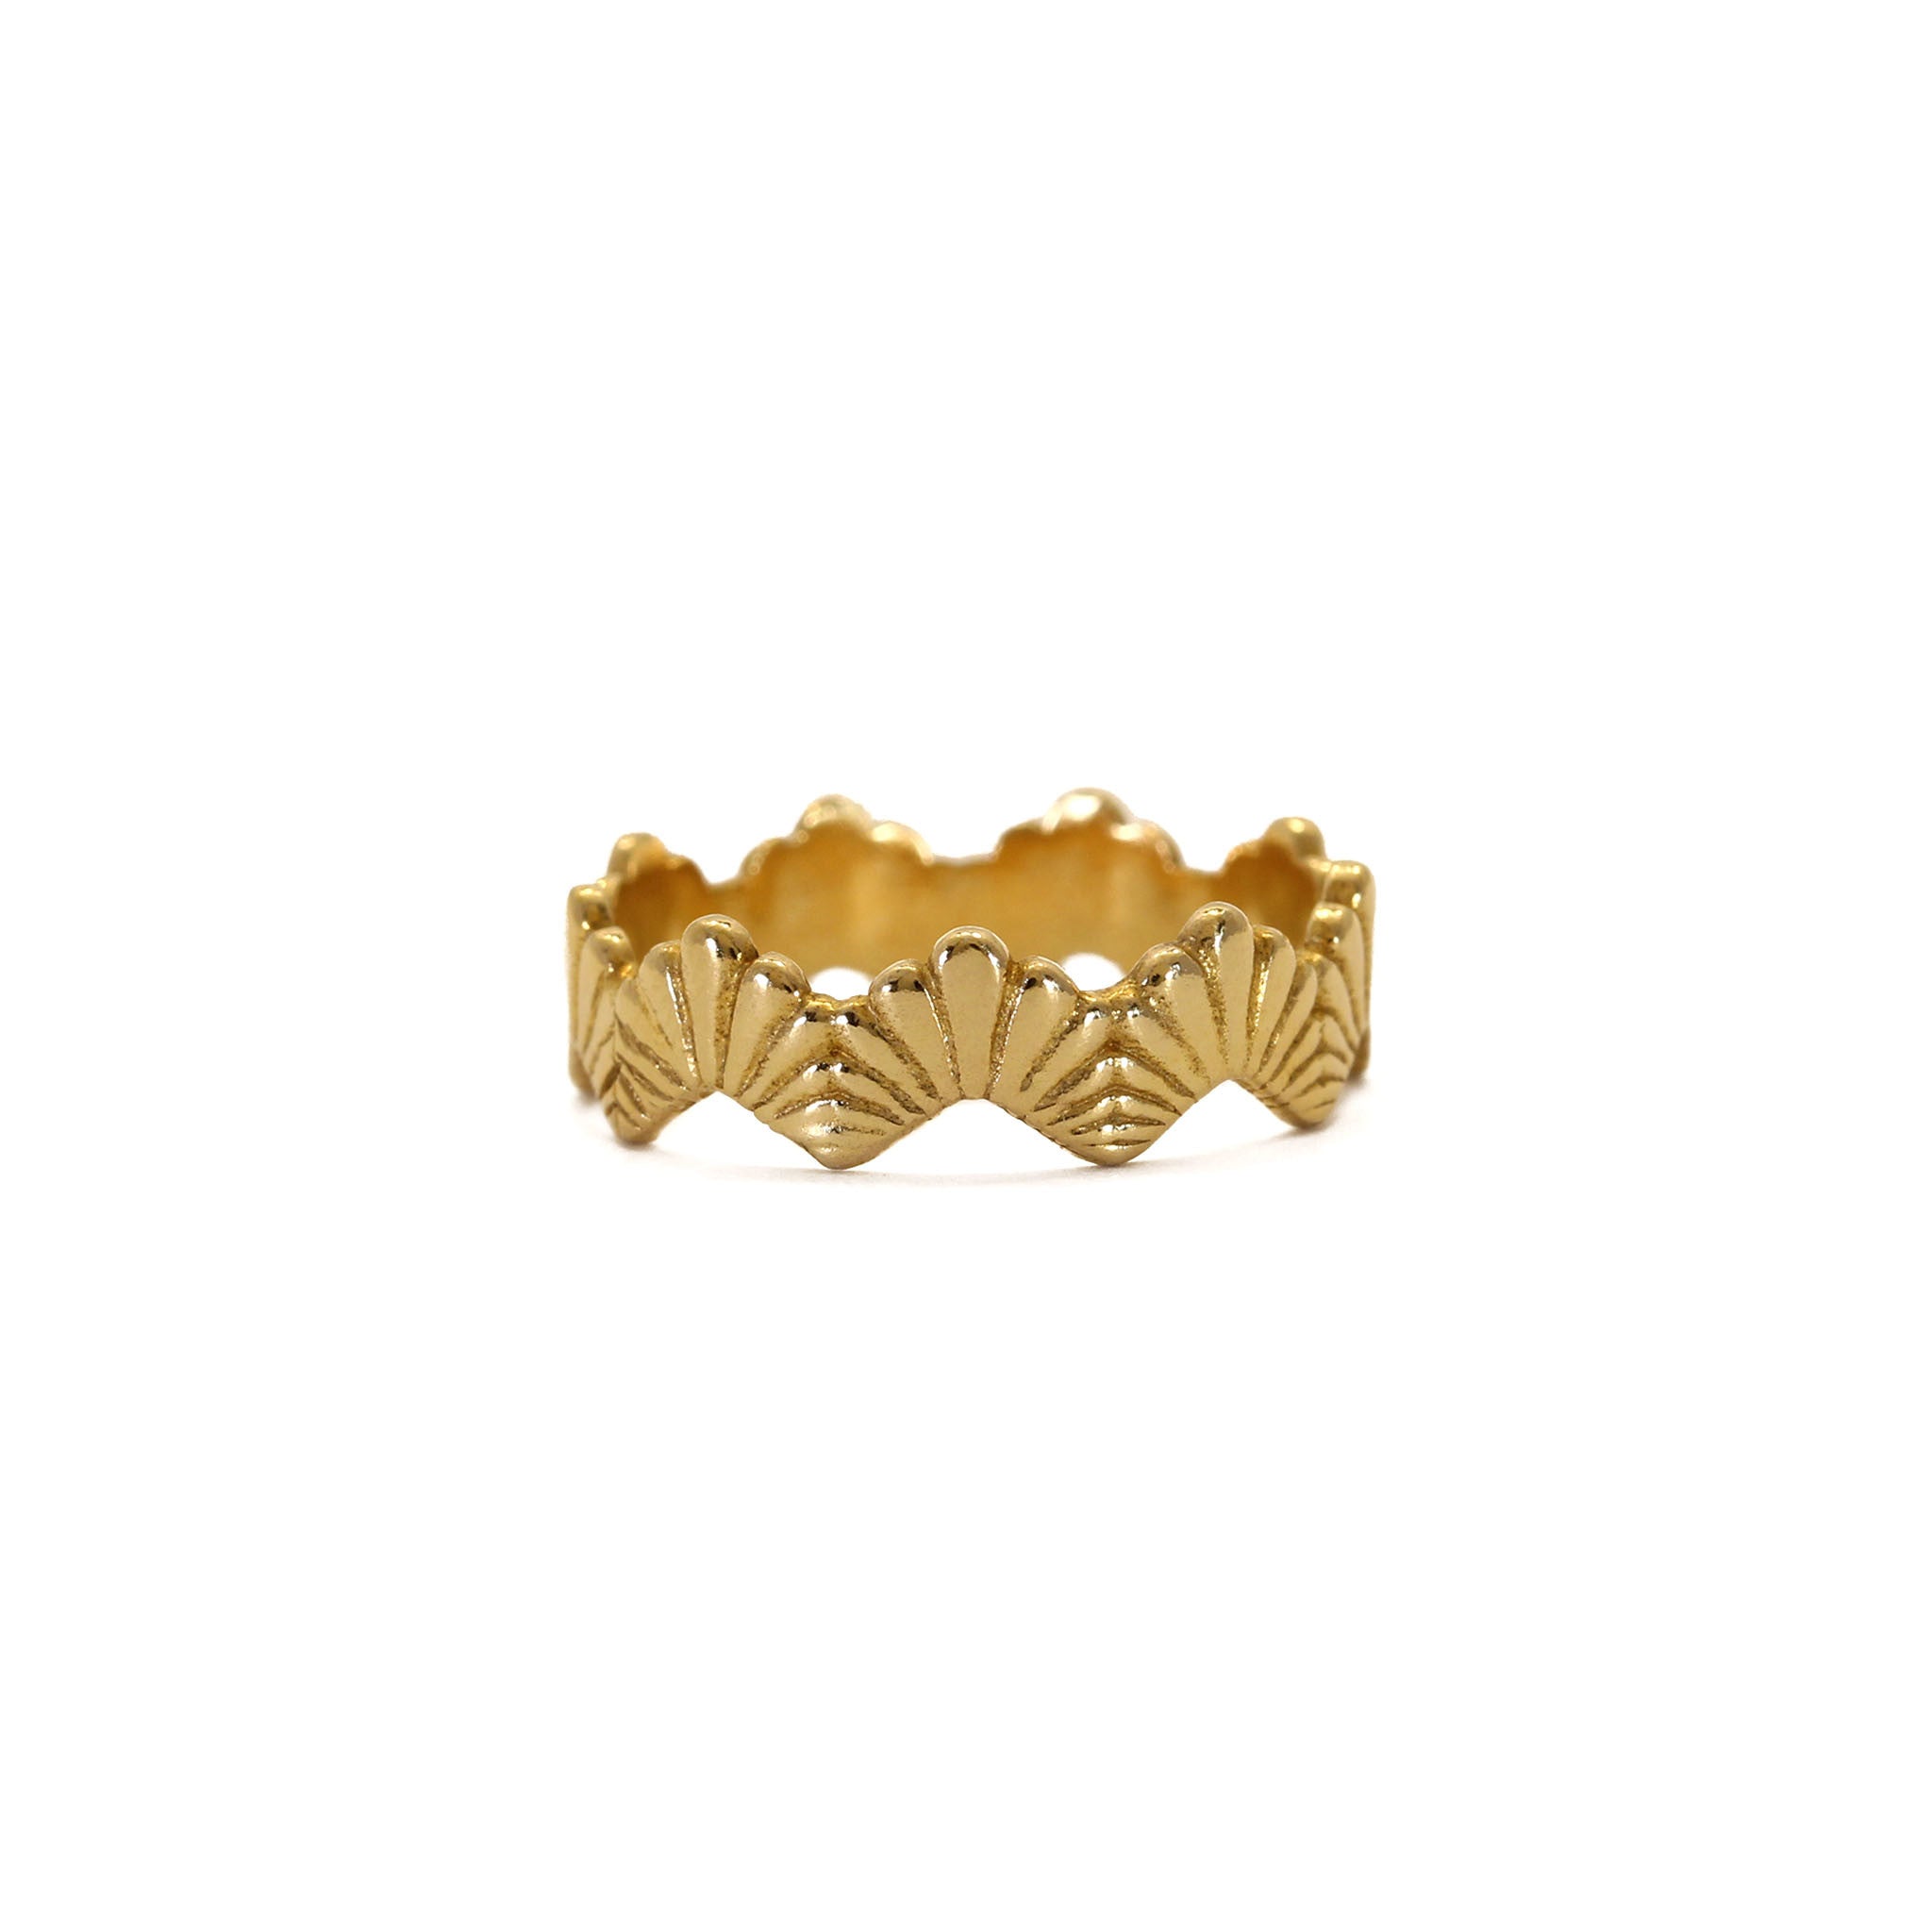 Loggia Shell Ring in yellow gold